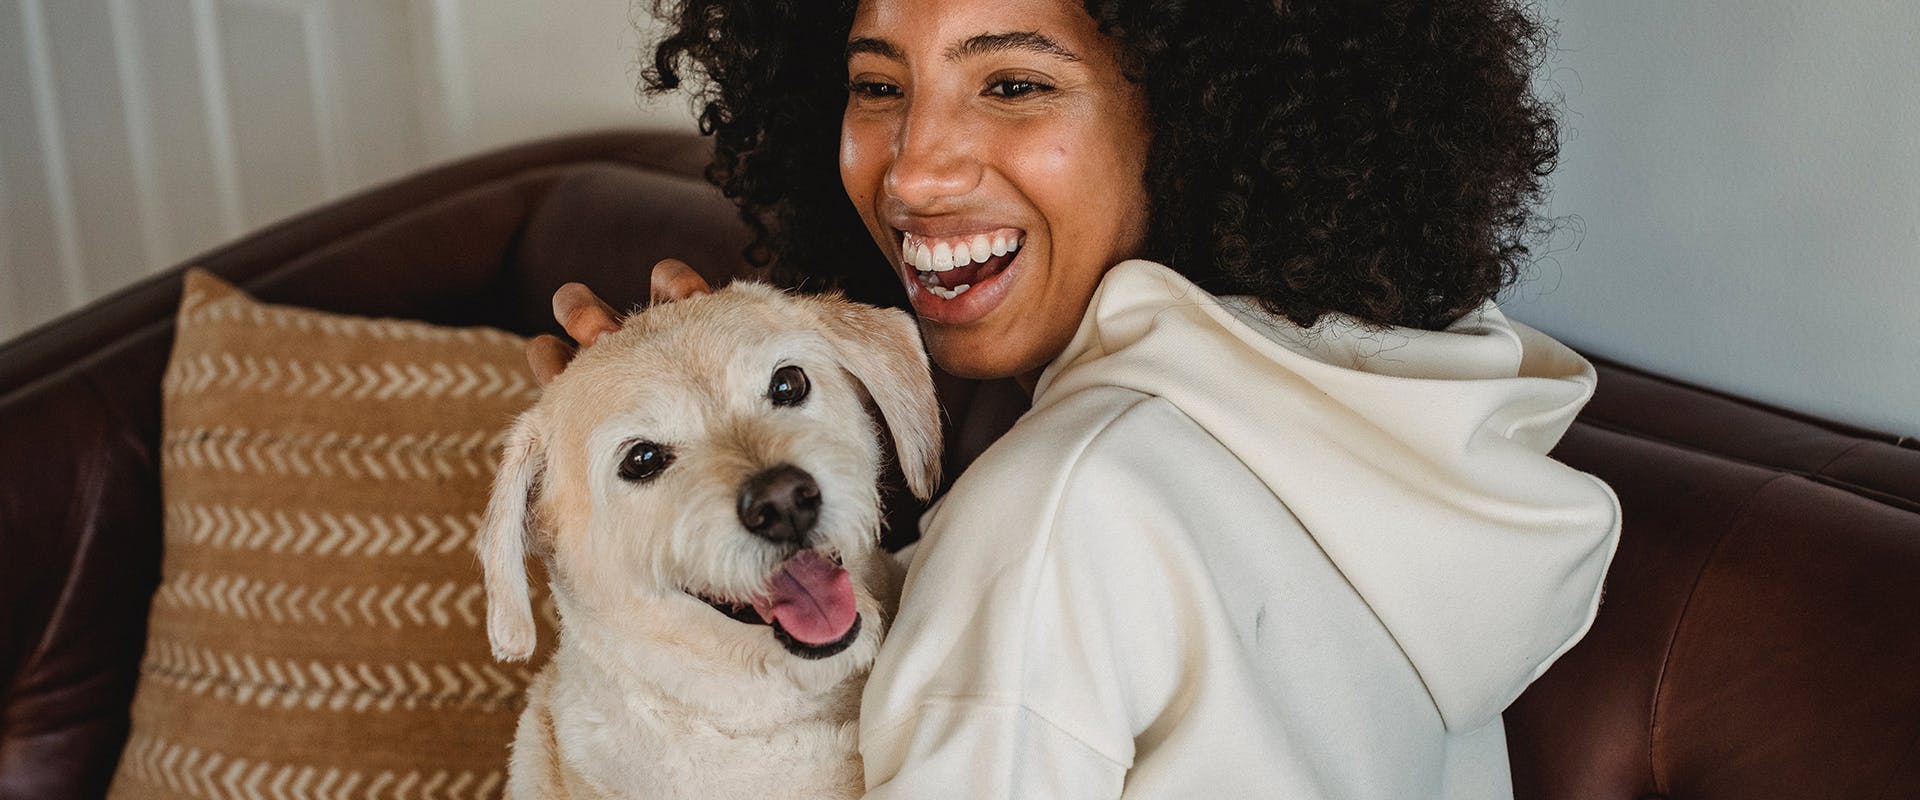 A woman laughing while holding a dog